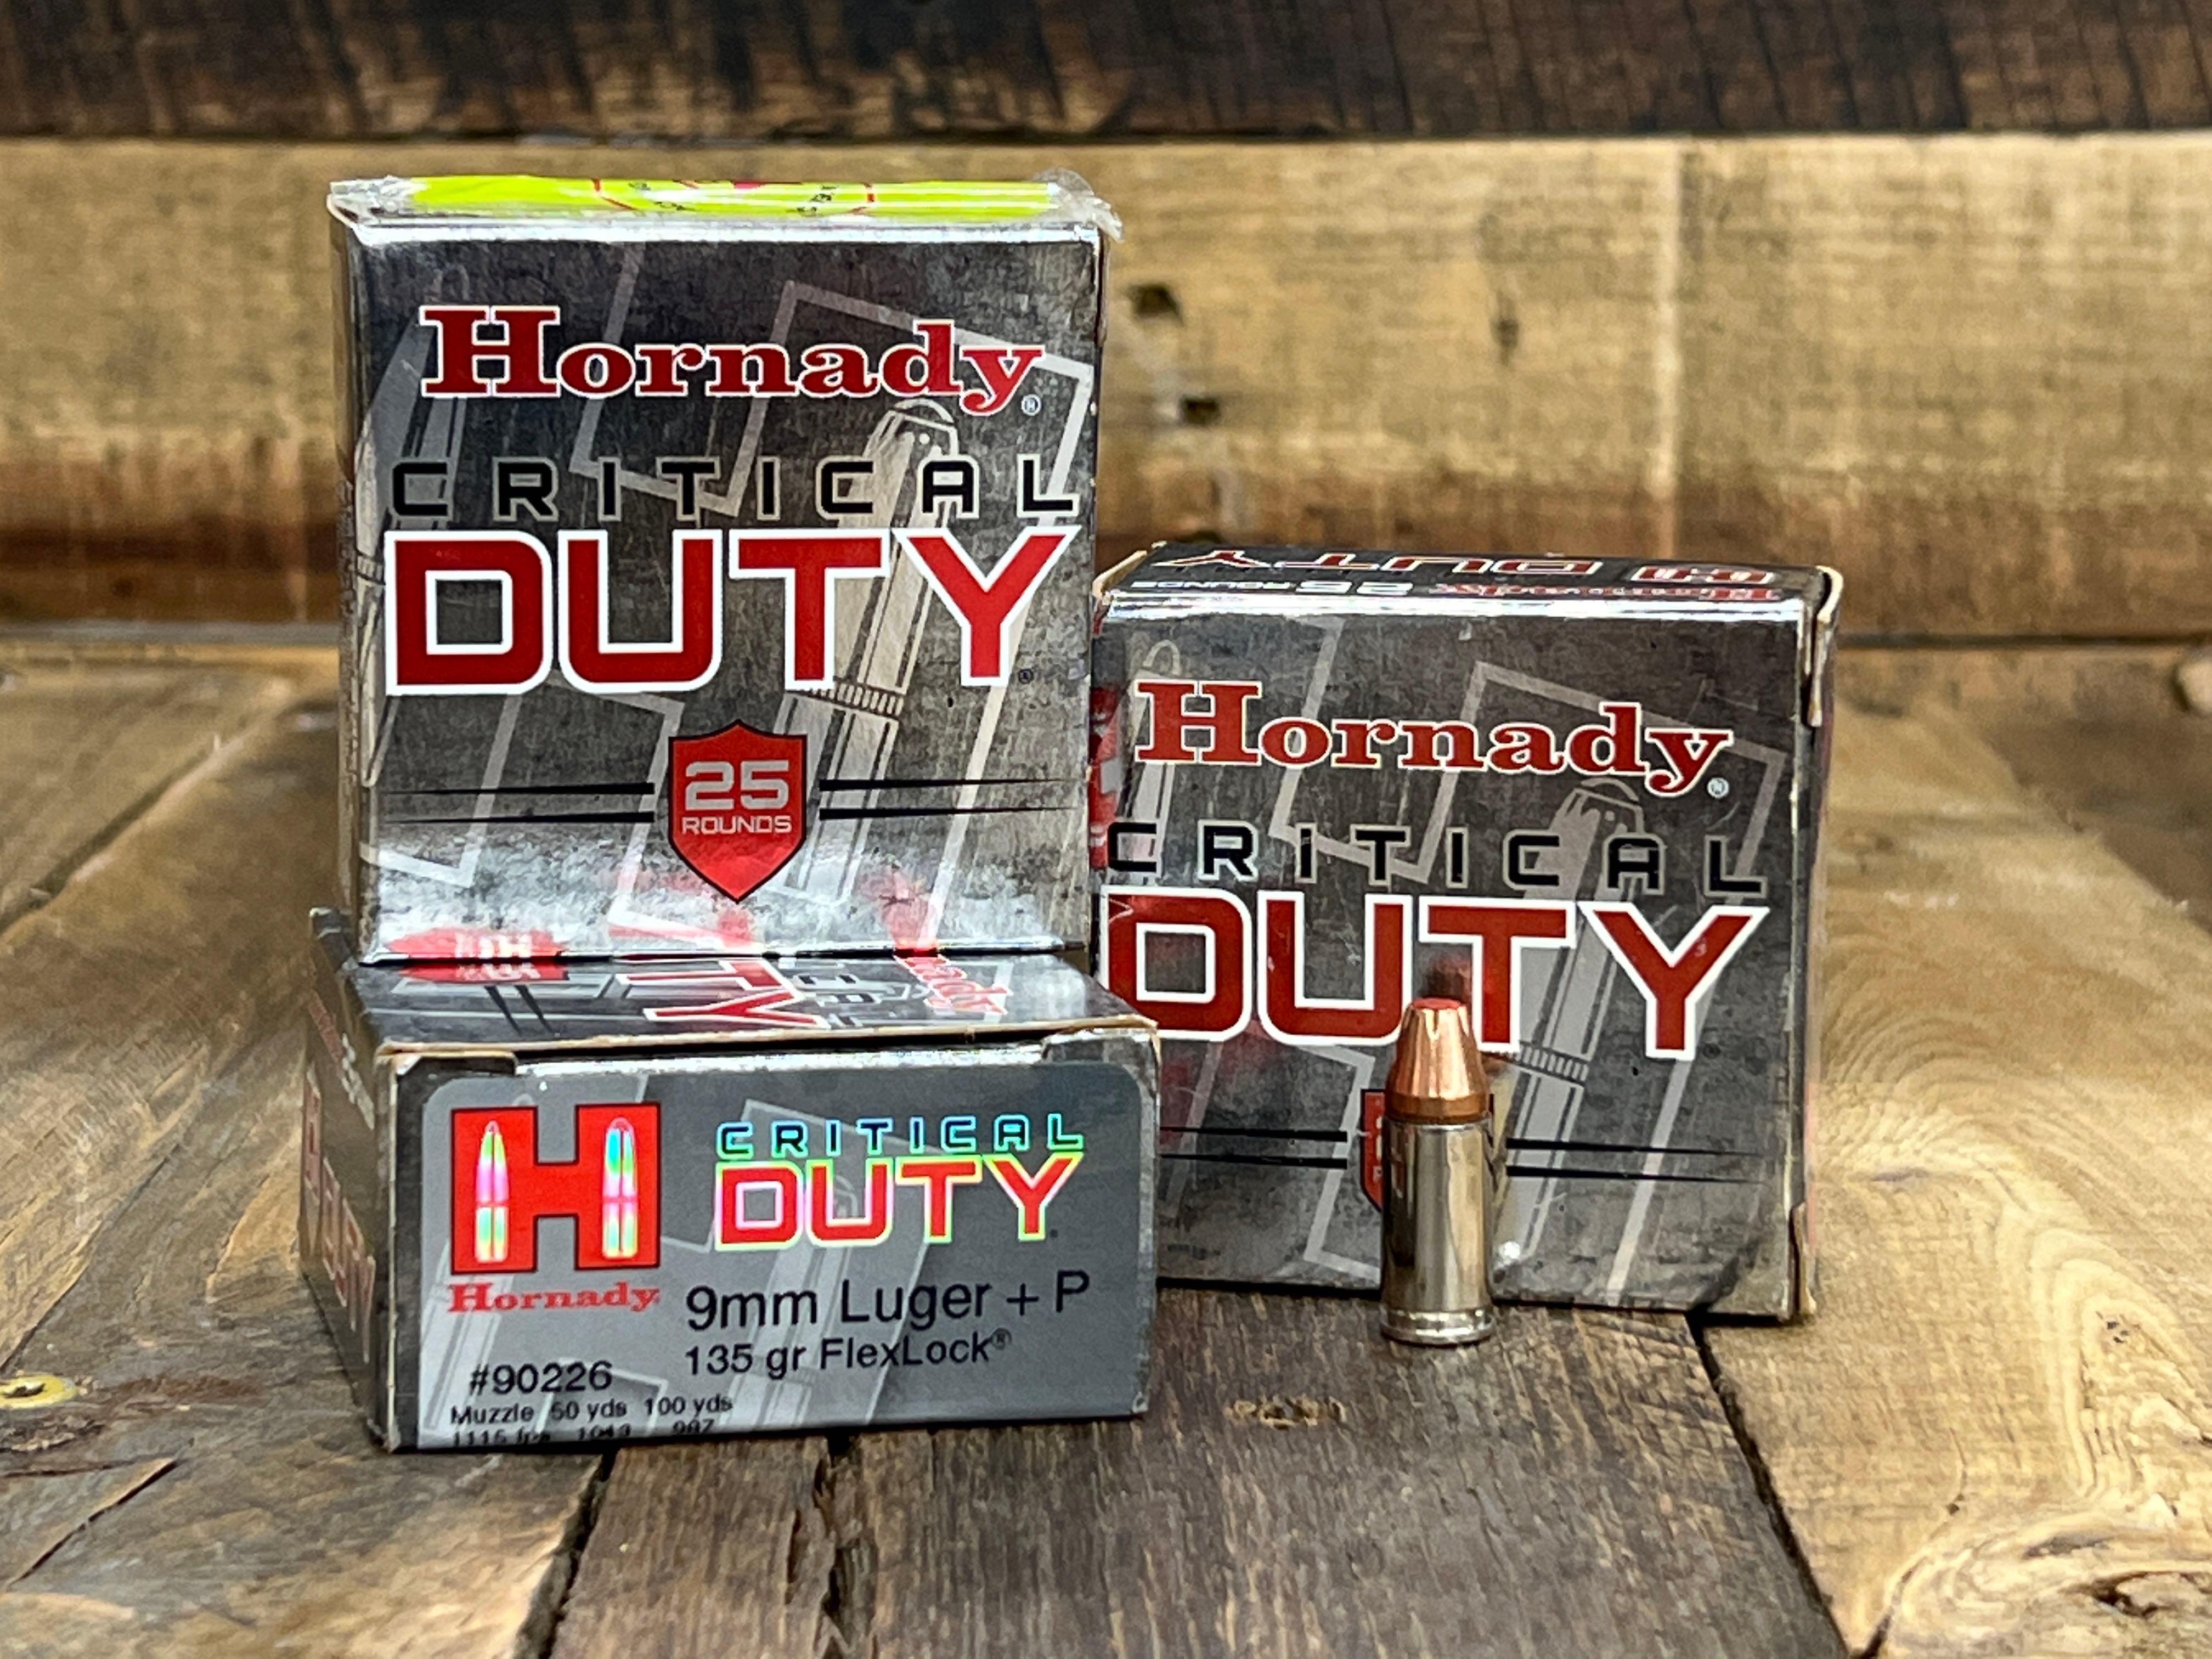 3 BOXES OF HORNADY CRITICAL DUTY 9MM LUGER+P AMMO